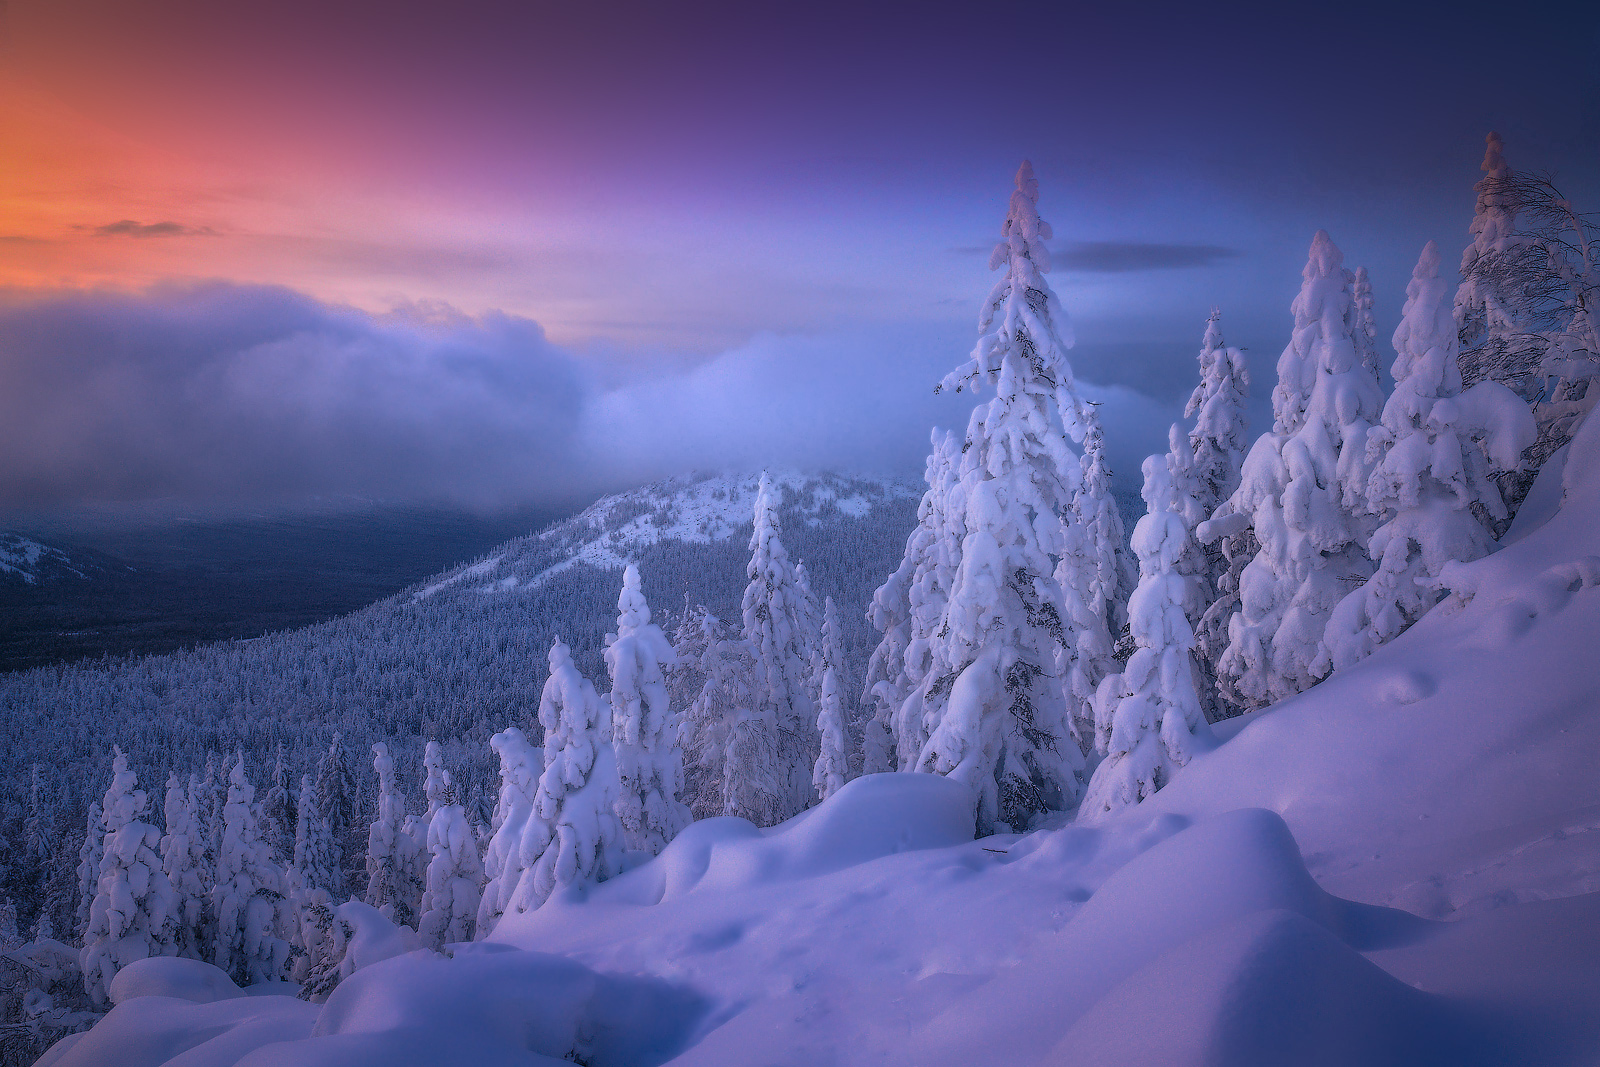 General 1600x1067 Vladimir Lyapin landscape sky colorful mist snow trees forest nature winter